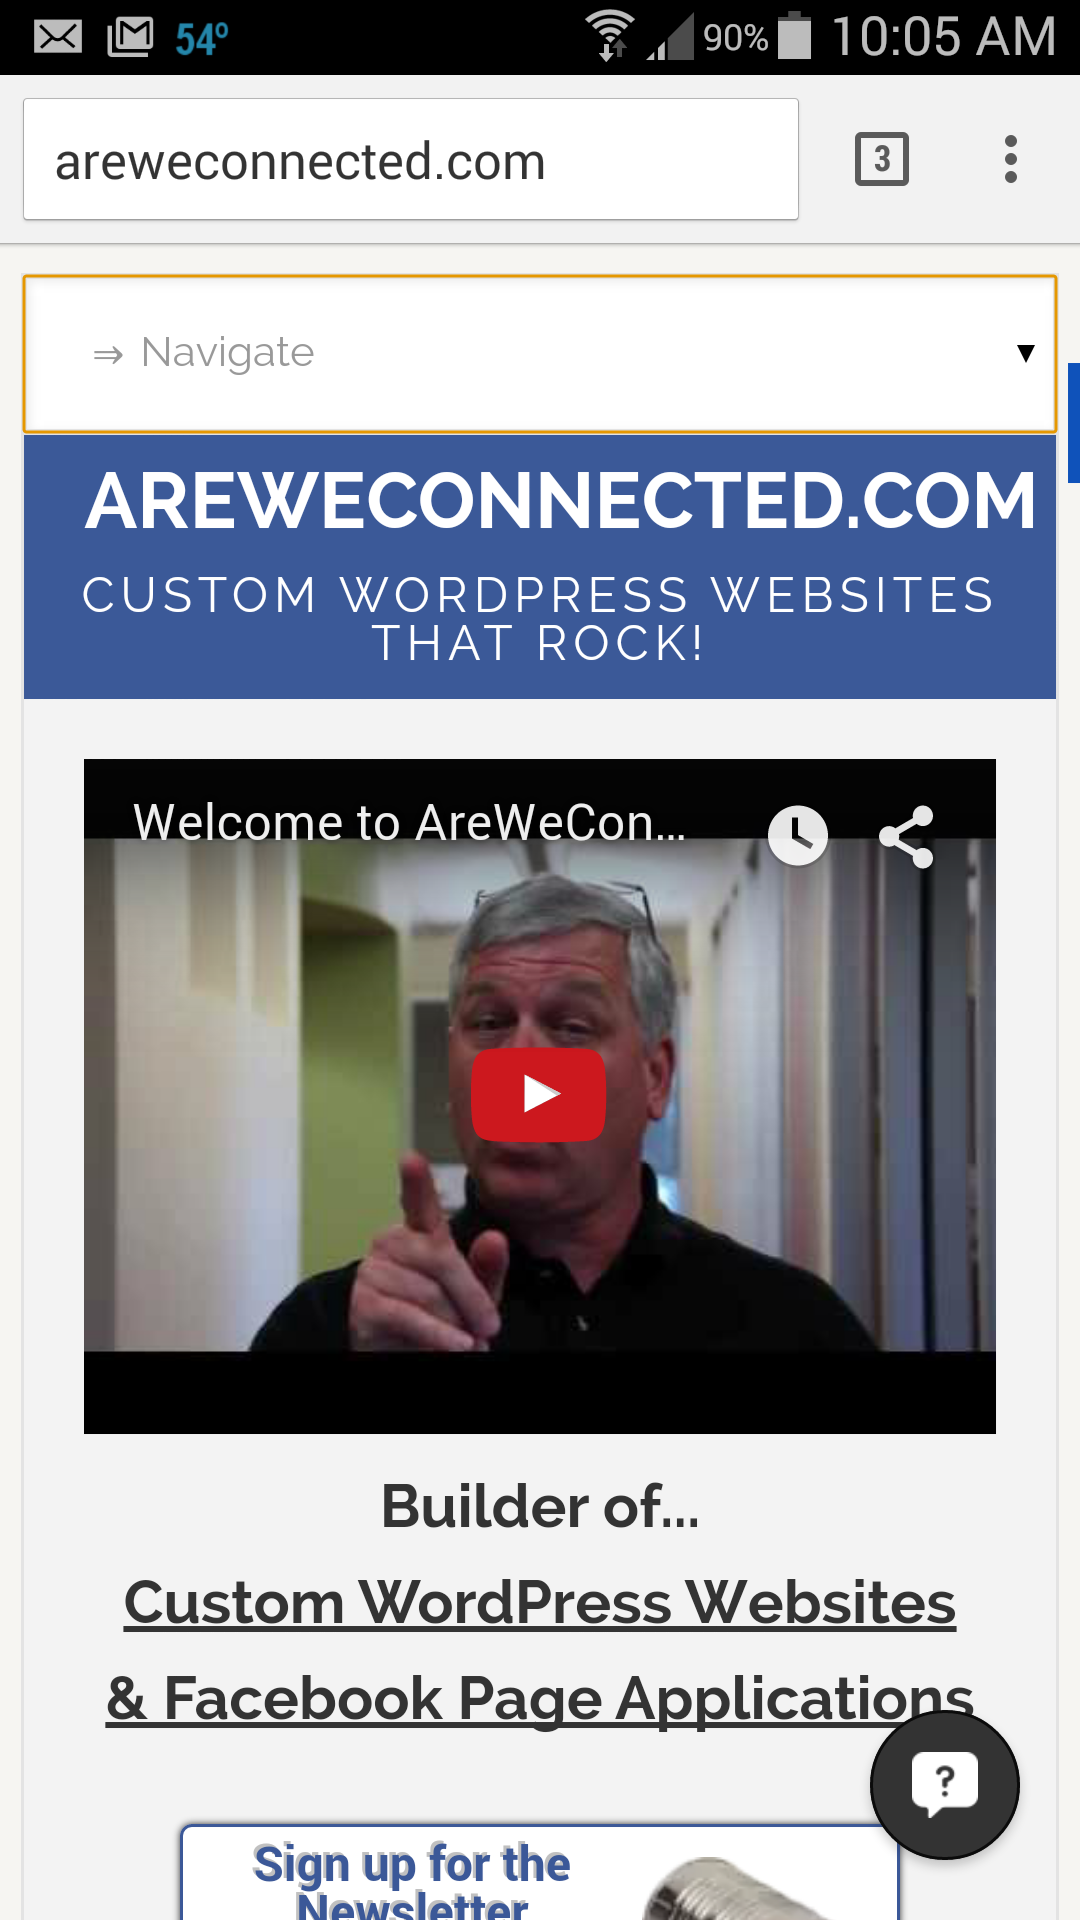 areweconnected on mobile